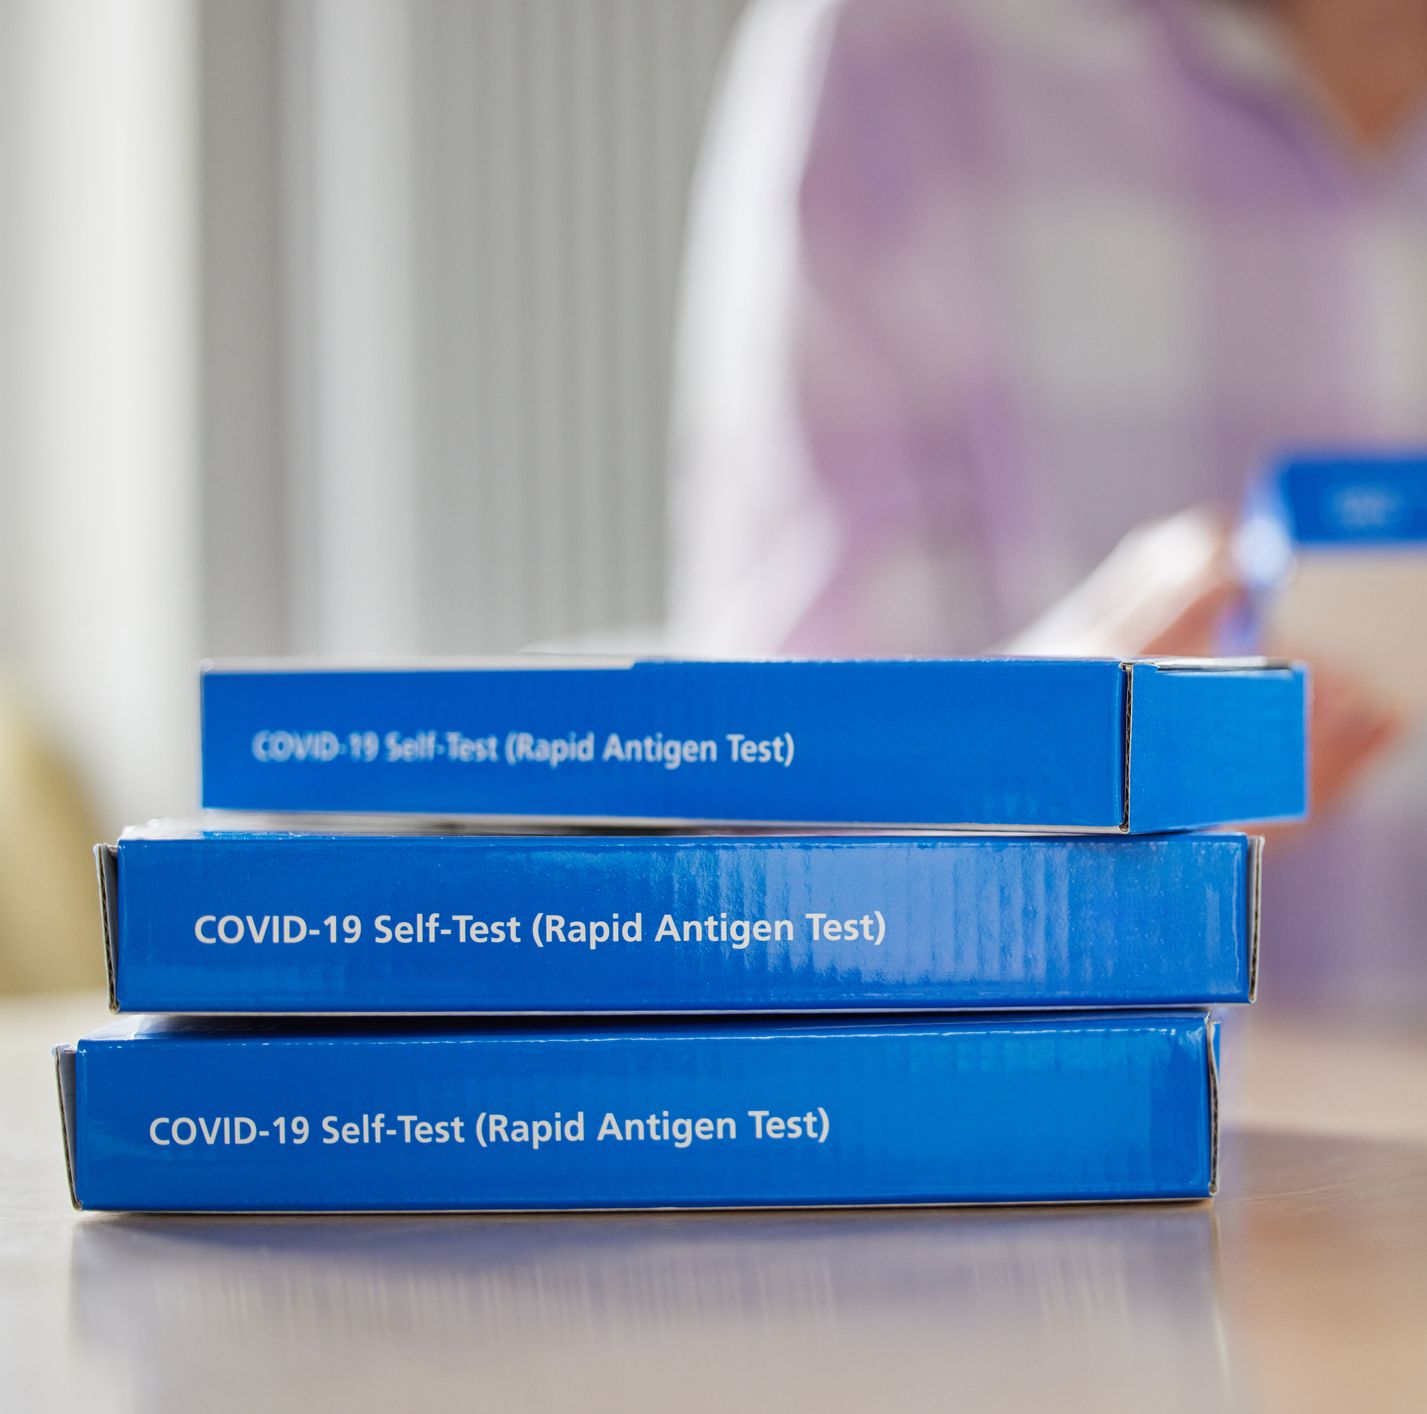 There's Only One Right Way to Store Your Home Covid Tests